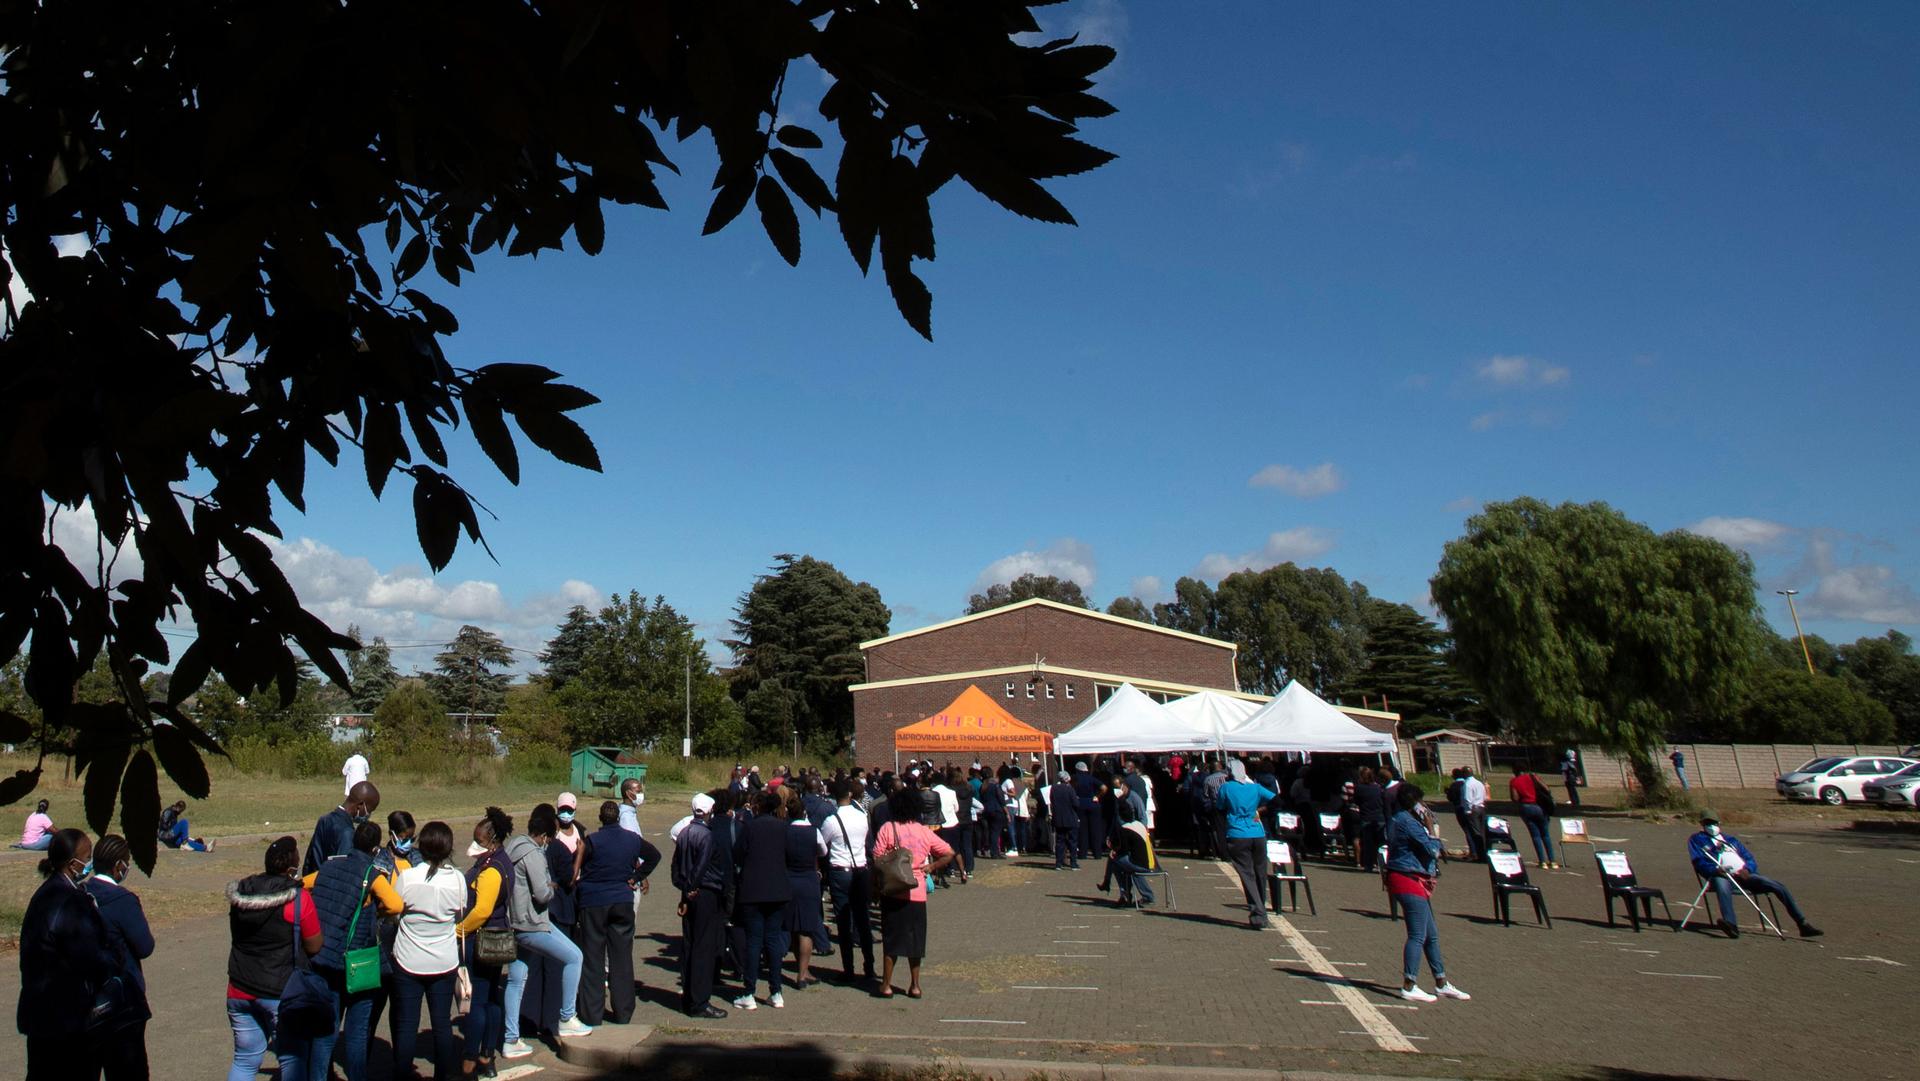 A long line of people are shown outside in a pkarking lot with an orange tent in the distance.